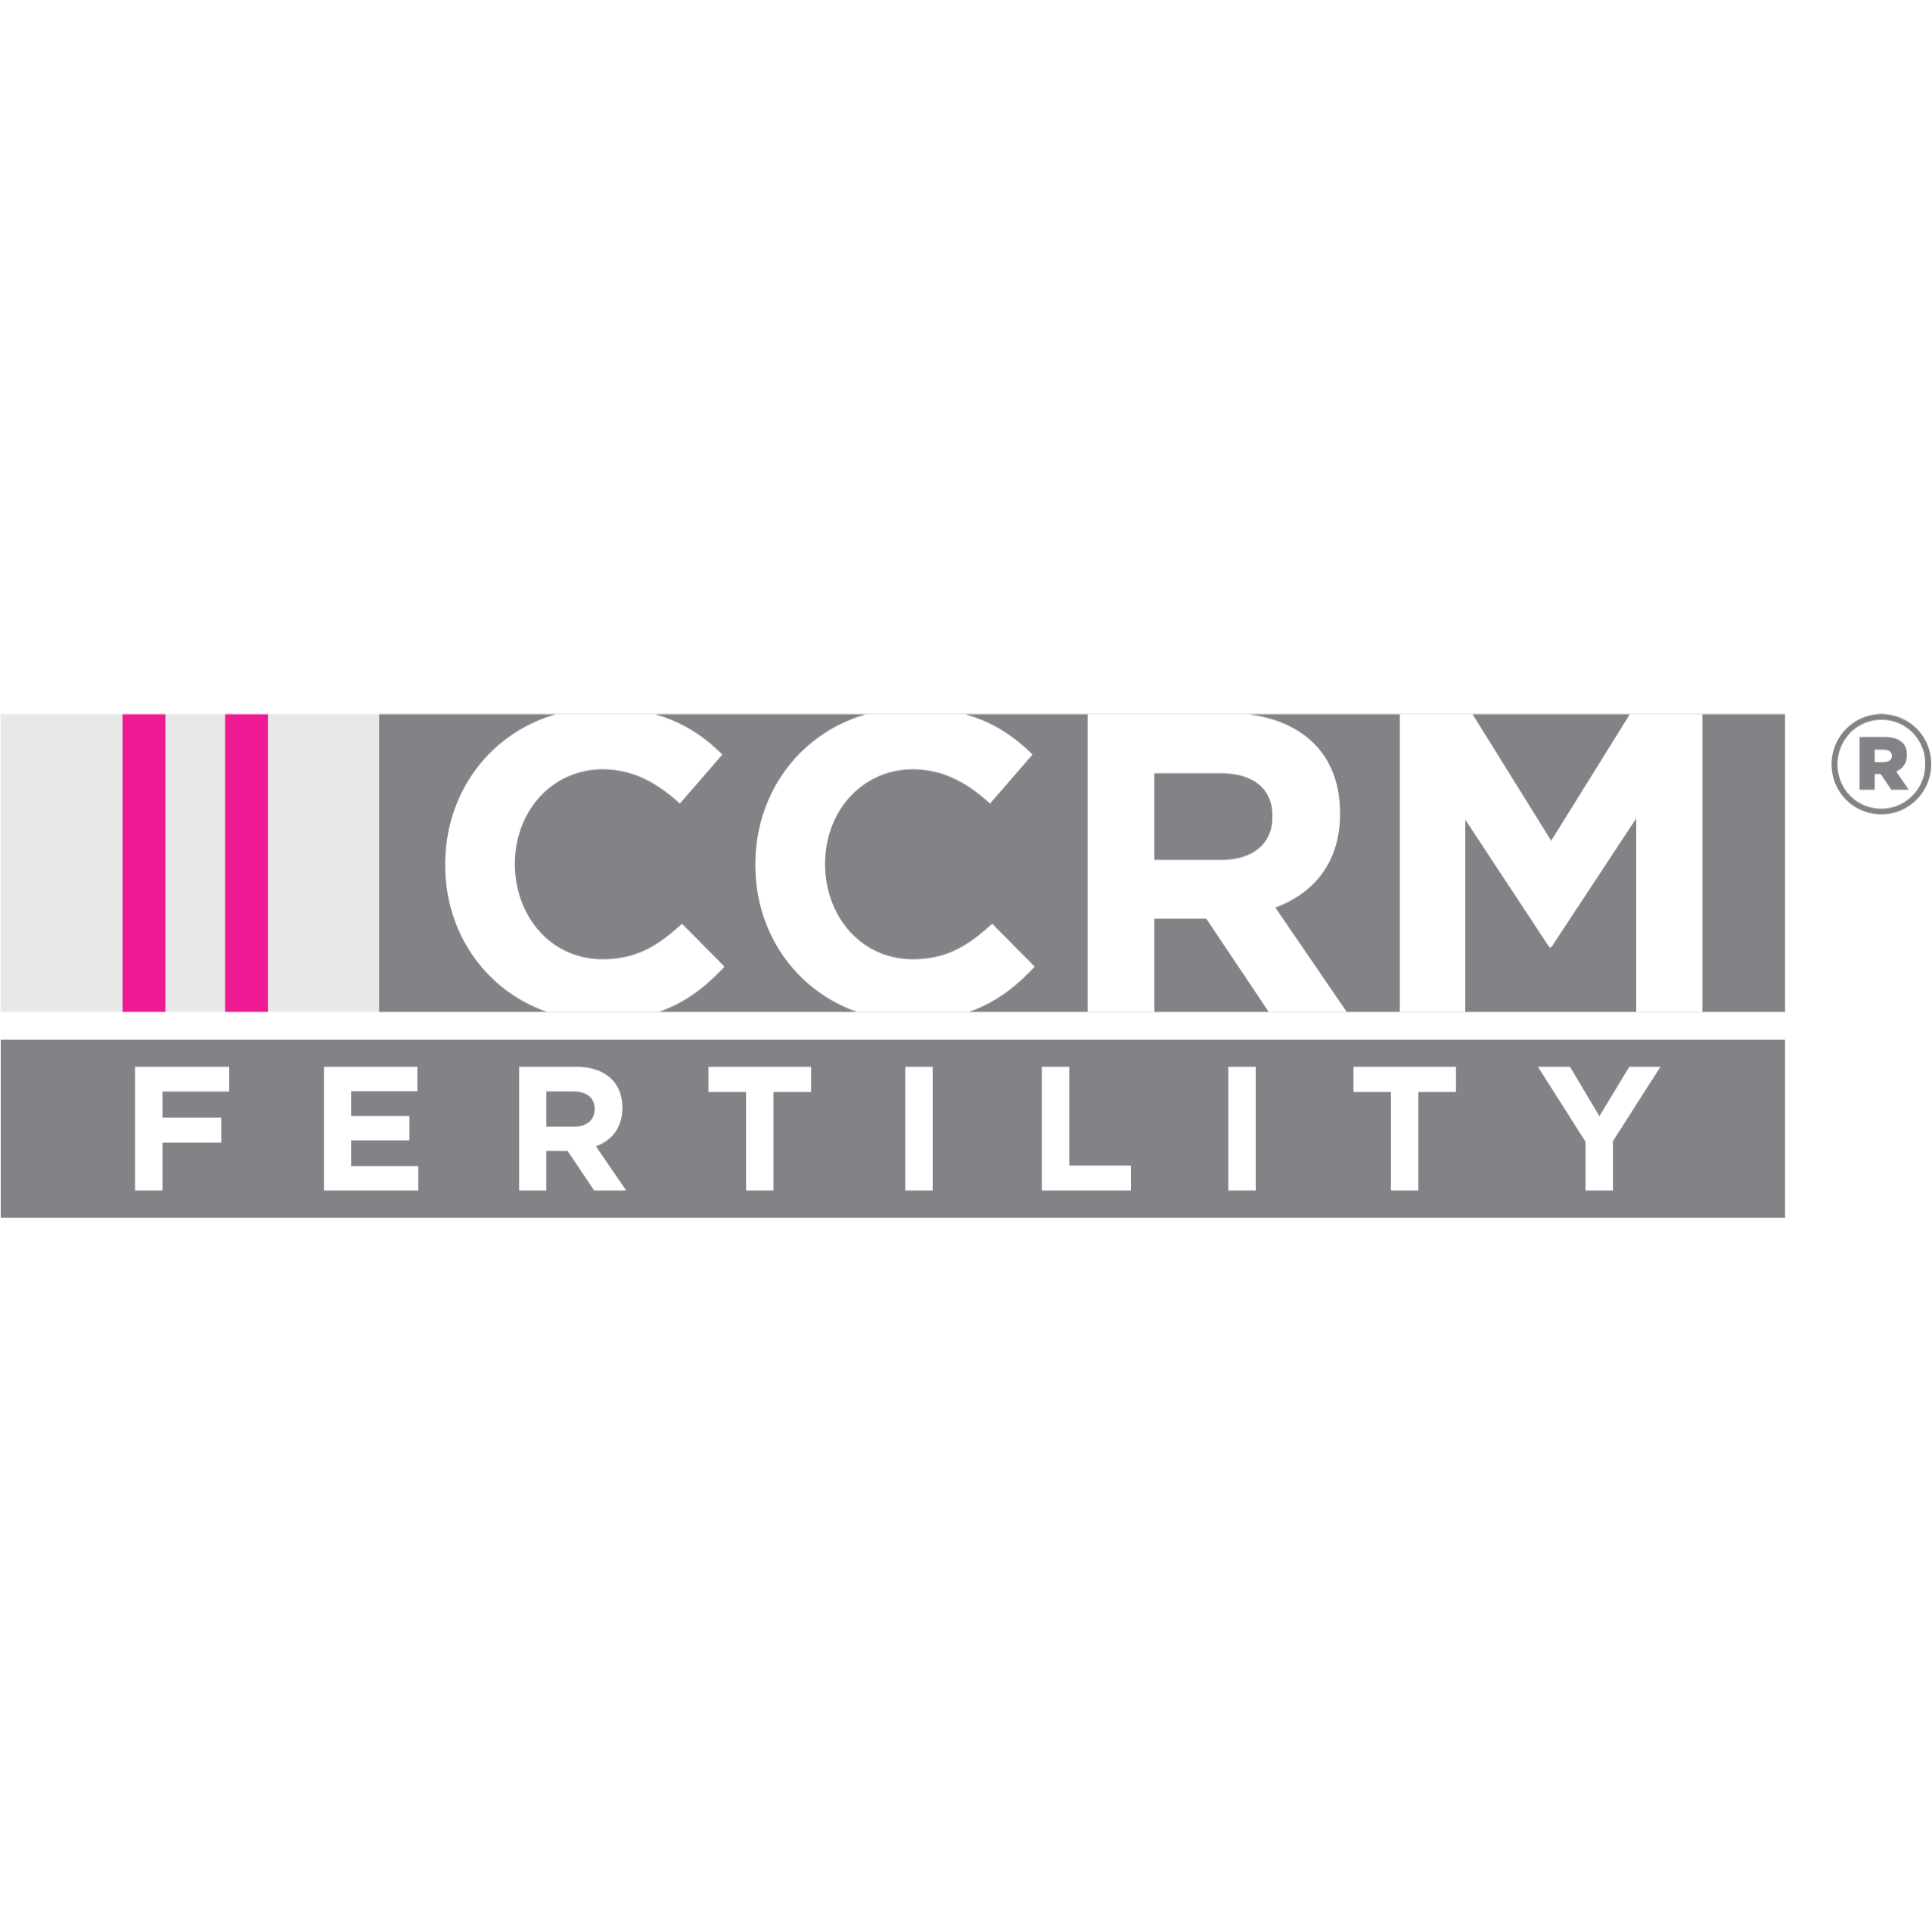 CCRM Fertility of Falmouth